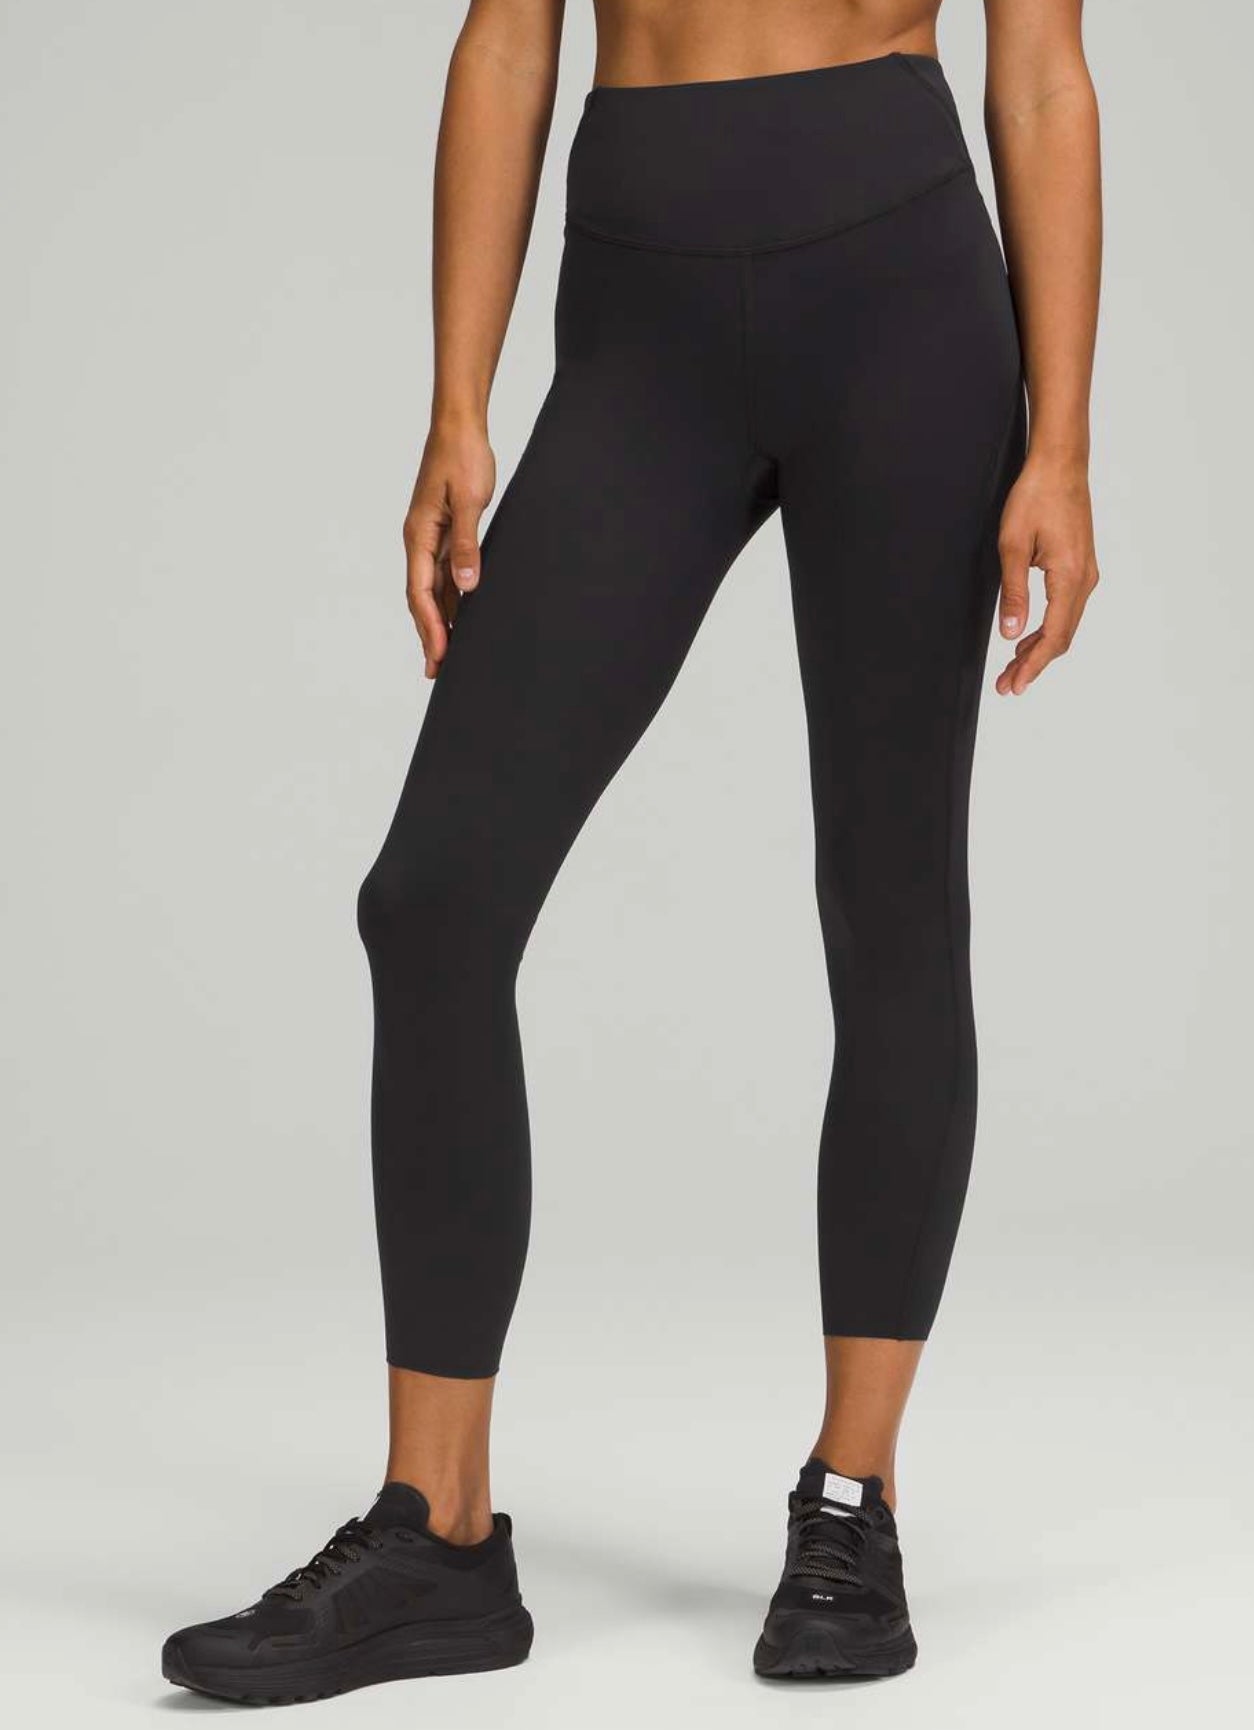 Really diggin the Base Pace Reflective tights in Smoked Spruce! : r/ lululemon